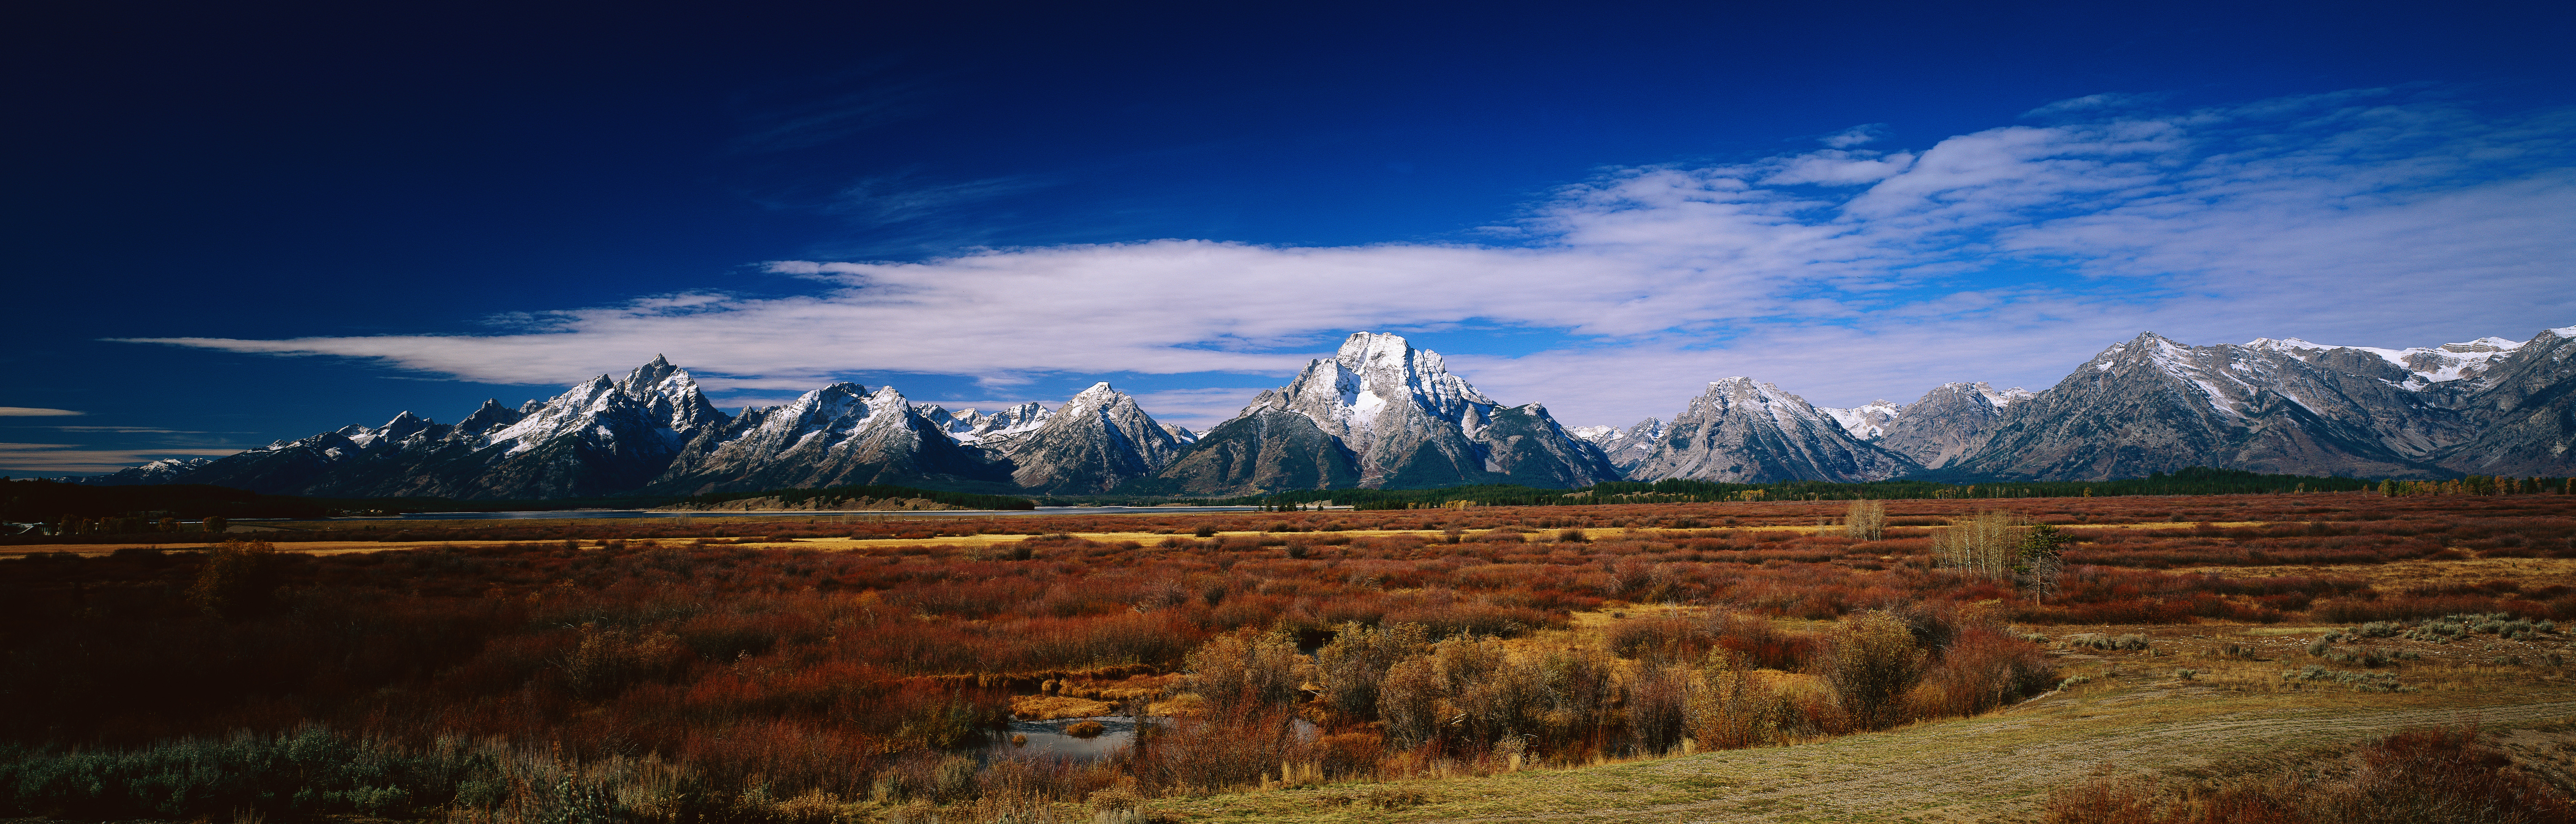 Jackson Hole lies in the heart of Wyoming cowboy country between the